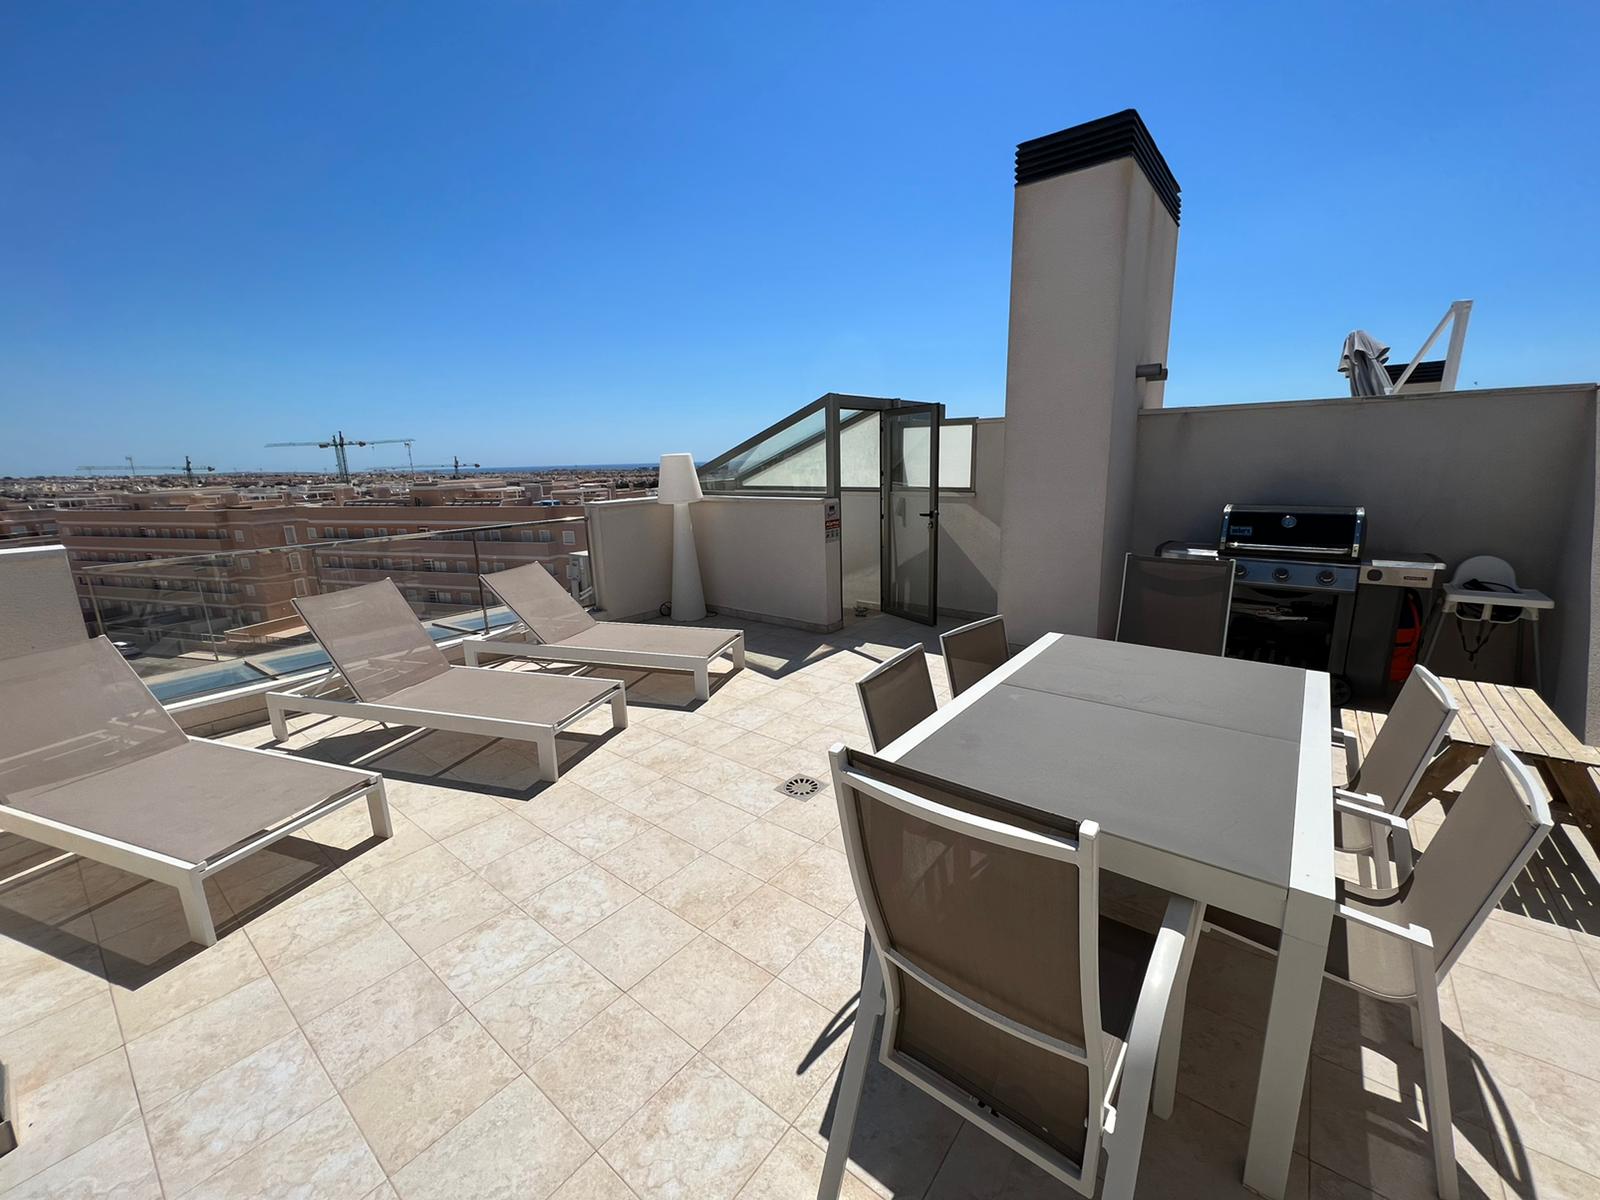 LUXURY PENTHOUSE WITH INCREDIBLE VIEWS LA ZENIA/LOS DOLSES - 3 BEDROOMS, STUNNING!